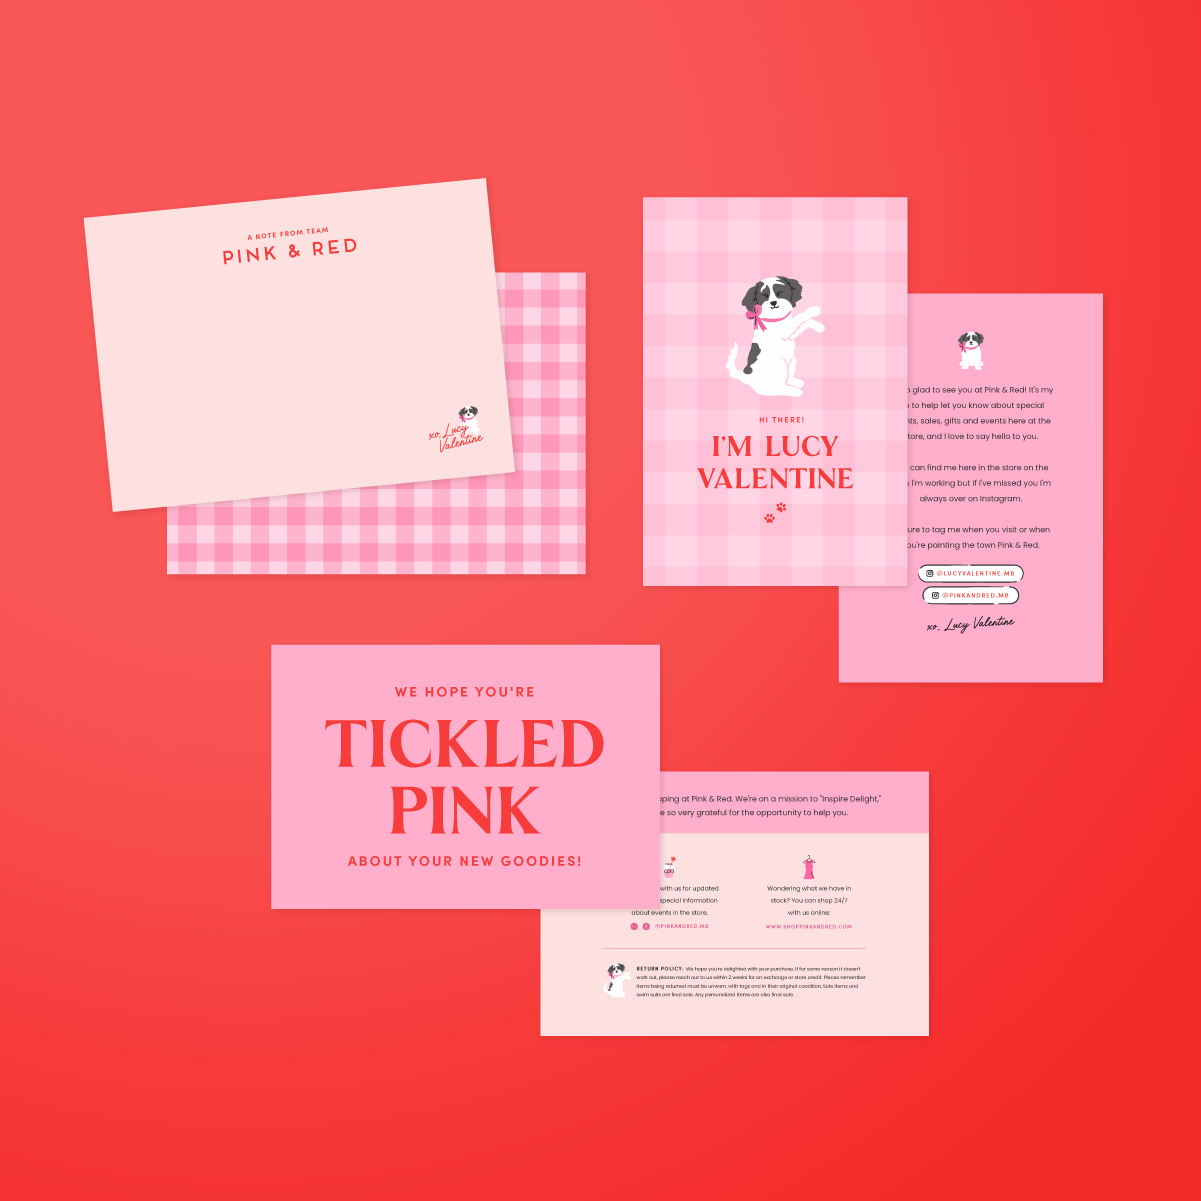 Brand Spotlight: Colorful & Bright Signage and Packaging for Pink & Red Boutique